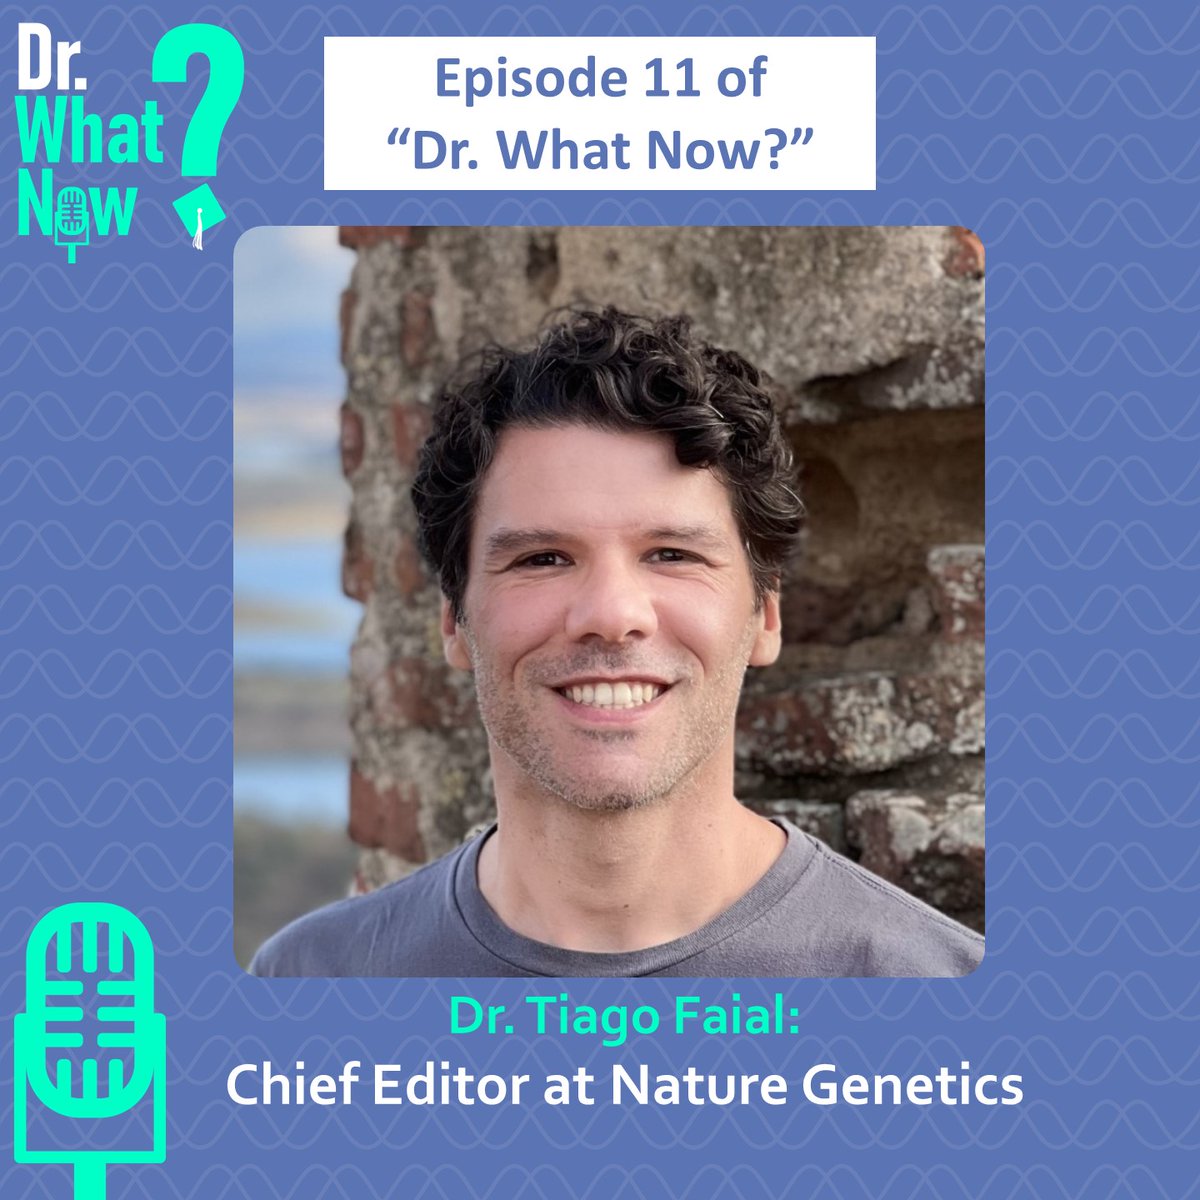 Ep. 11 is out! Considering an editing career? Zoe interviews Dr. Tiago Faial, @NatureGenet chief editor. They explore shifts in scientific publishing and the editor's daily role and career trajectory🎧Listen now: shorturl.at/nqEIL #Dr_WhatNow #Podcast #Nature